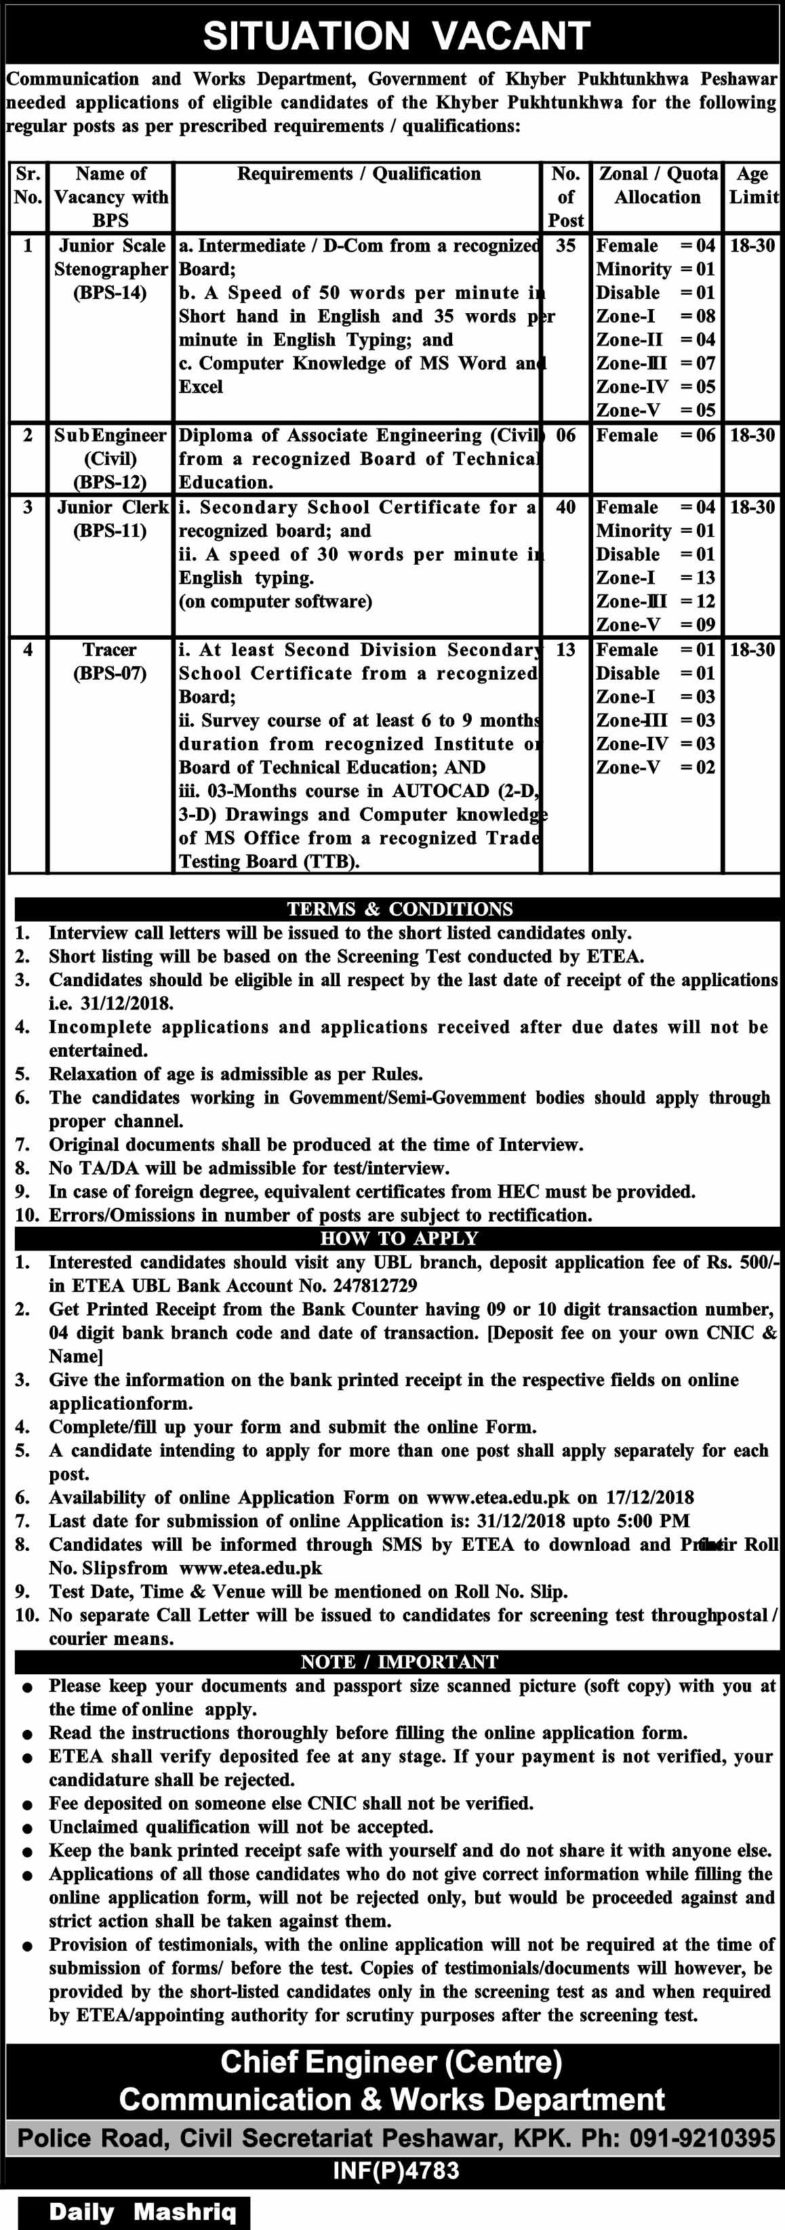 KP CWD Department Jobs 2019 for 94+ Jr Stenographers, Jr Clerks, Sub-Engineers and Tracers